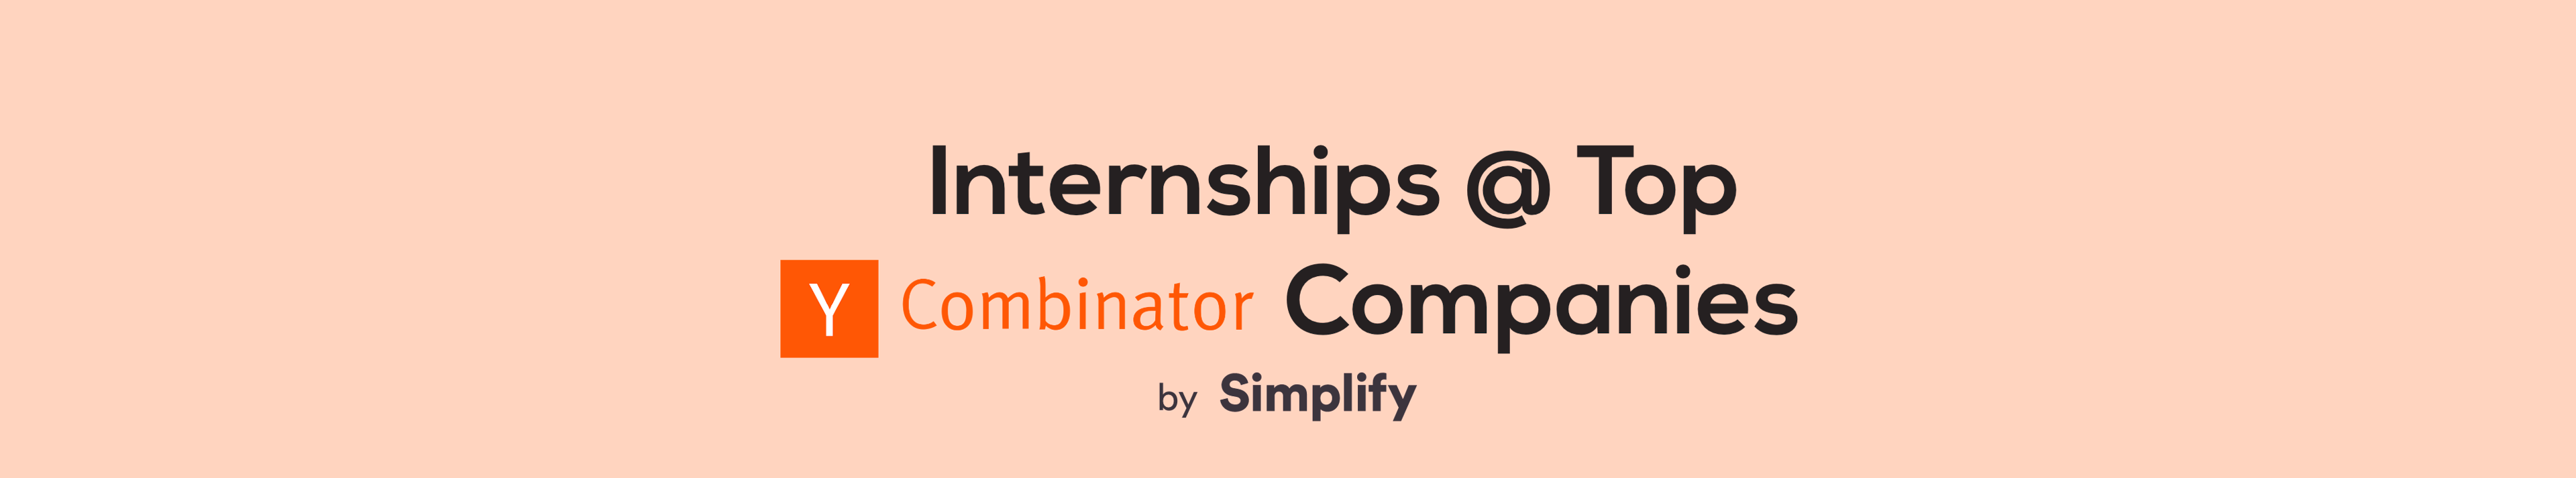 text that says “Internships at top YCombinator companies by Simplify” against an orange background